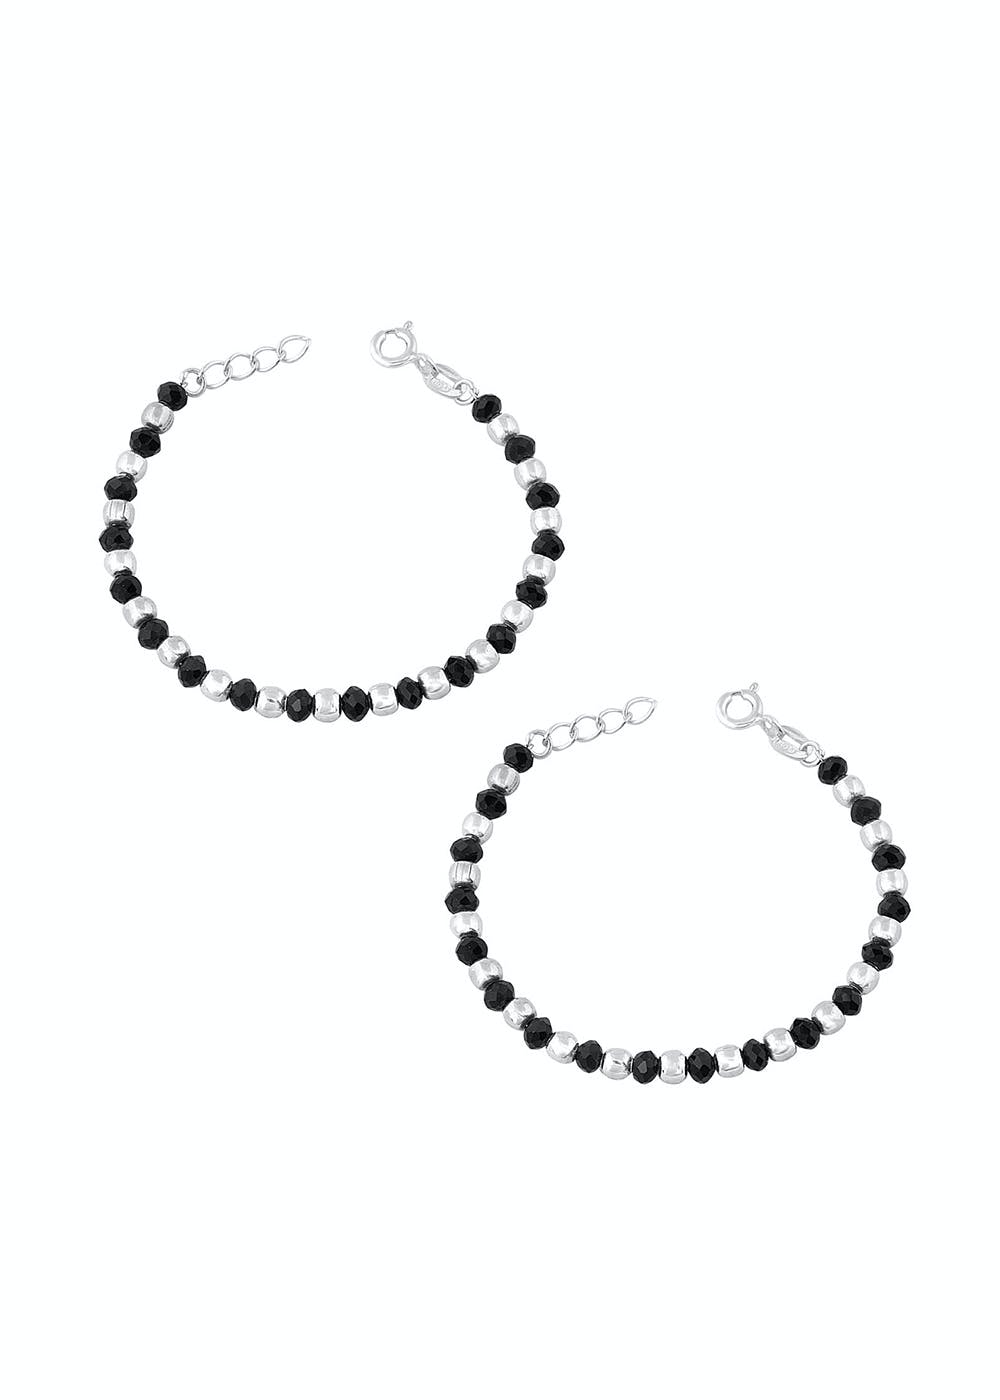 Vrindam Exclusive 925 Sterling Silver Bracelet/Najariya With Black Beads  For Girls And Women_Adjustable_Comfortable_Traditional : Amazon.in: Fashion